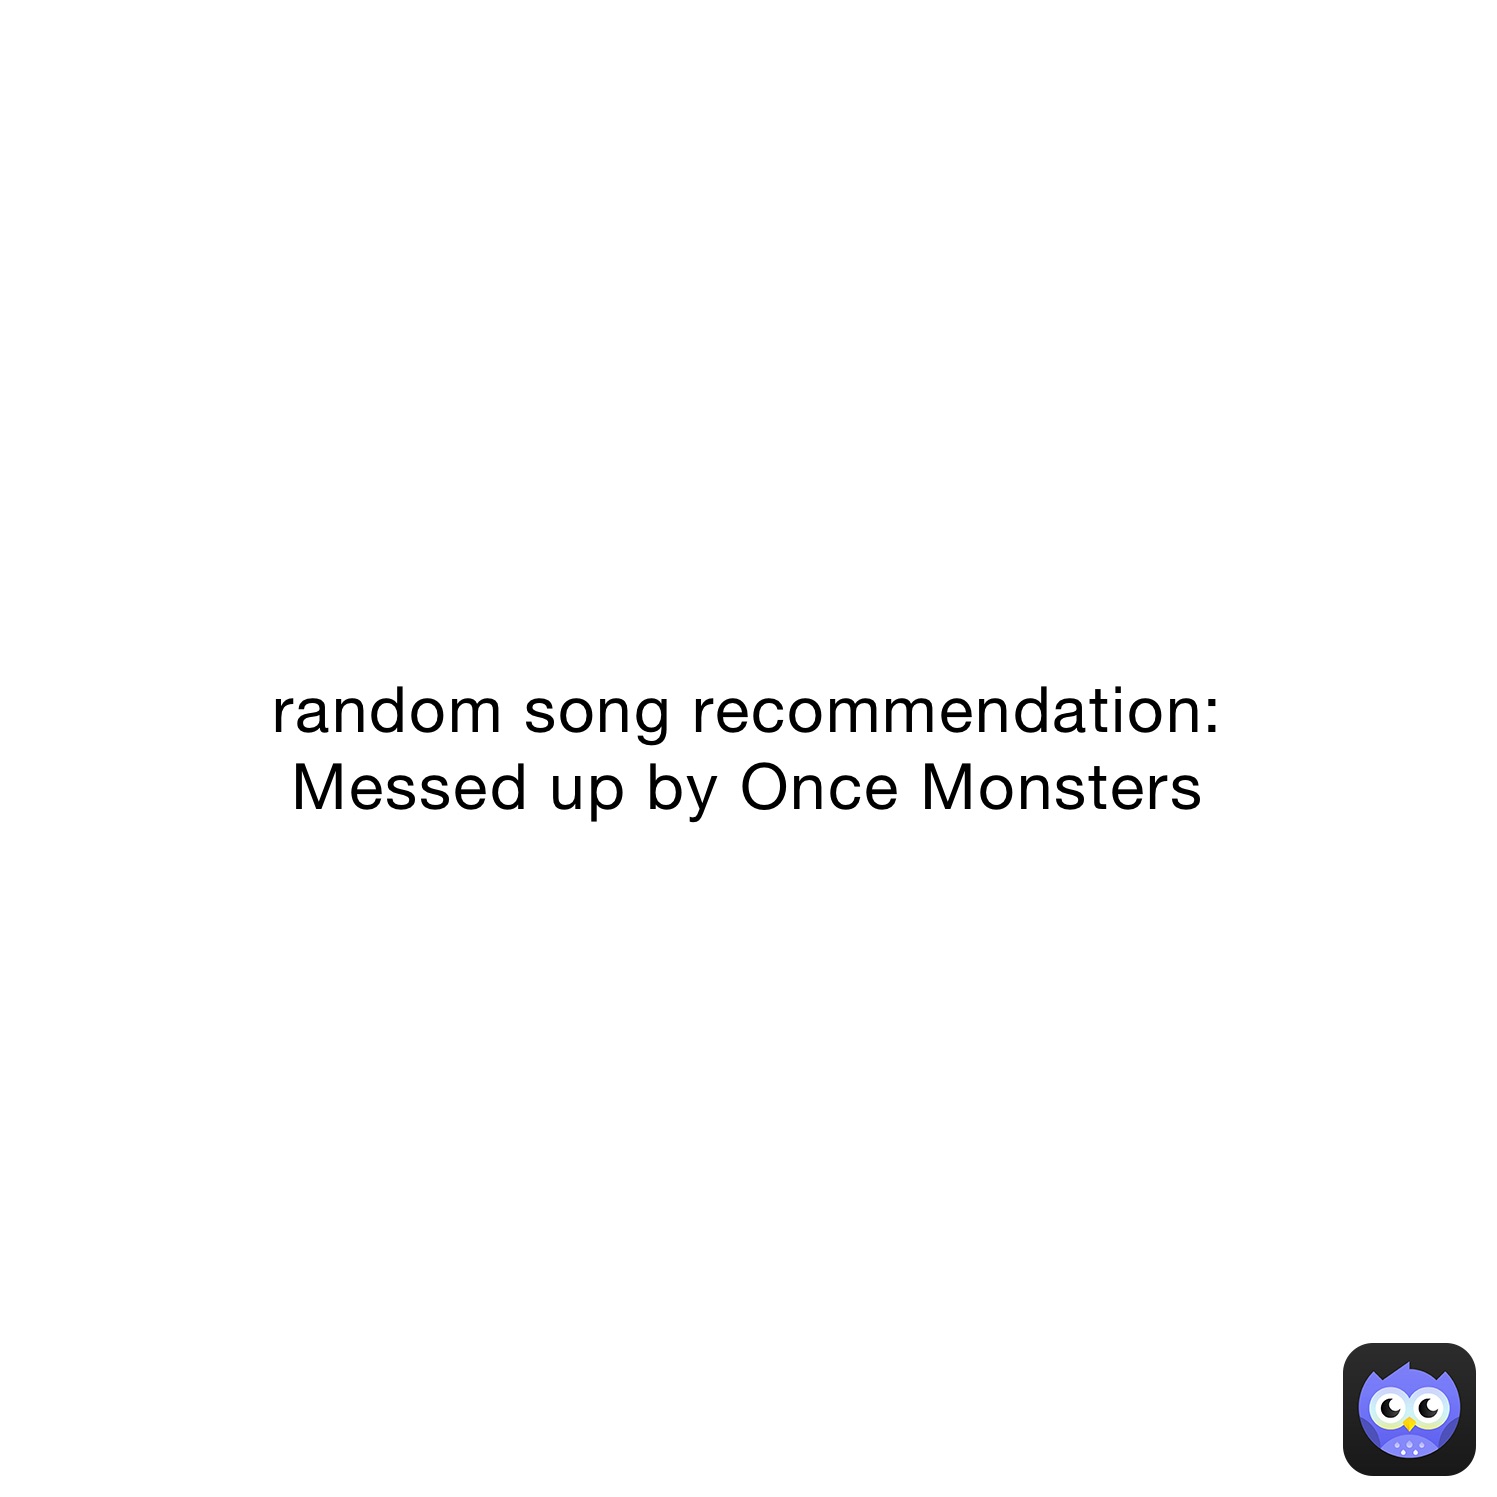 random song recommendation: 
Messed up by Once Monsters